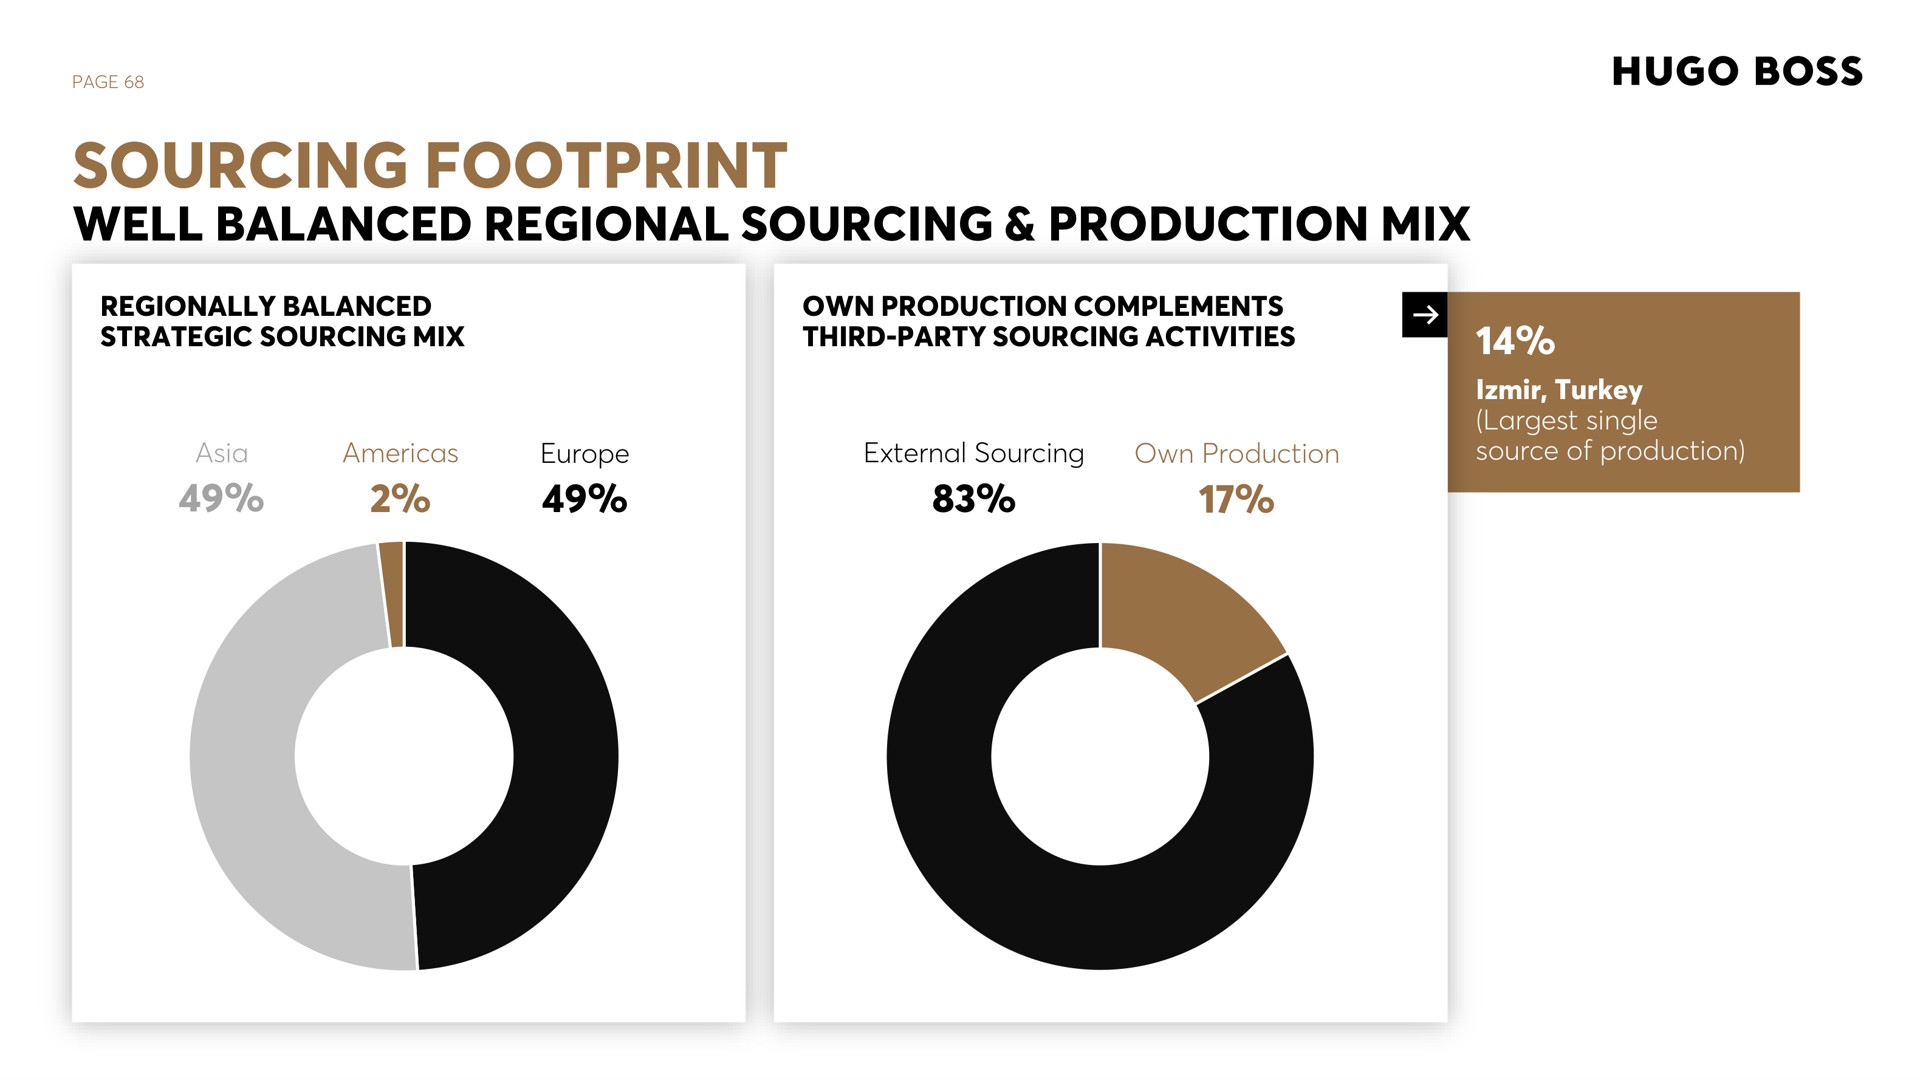 page sourcing footprint well balanced regional sourcing production mix regionally balanced strategic sourcing mix own production complements third party sourcing activities external sourcing own production turkey single source of production | Hugo Boss